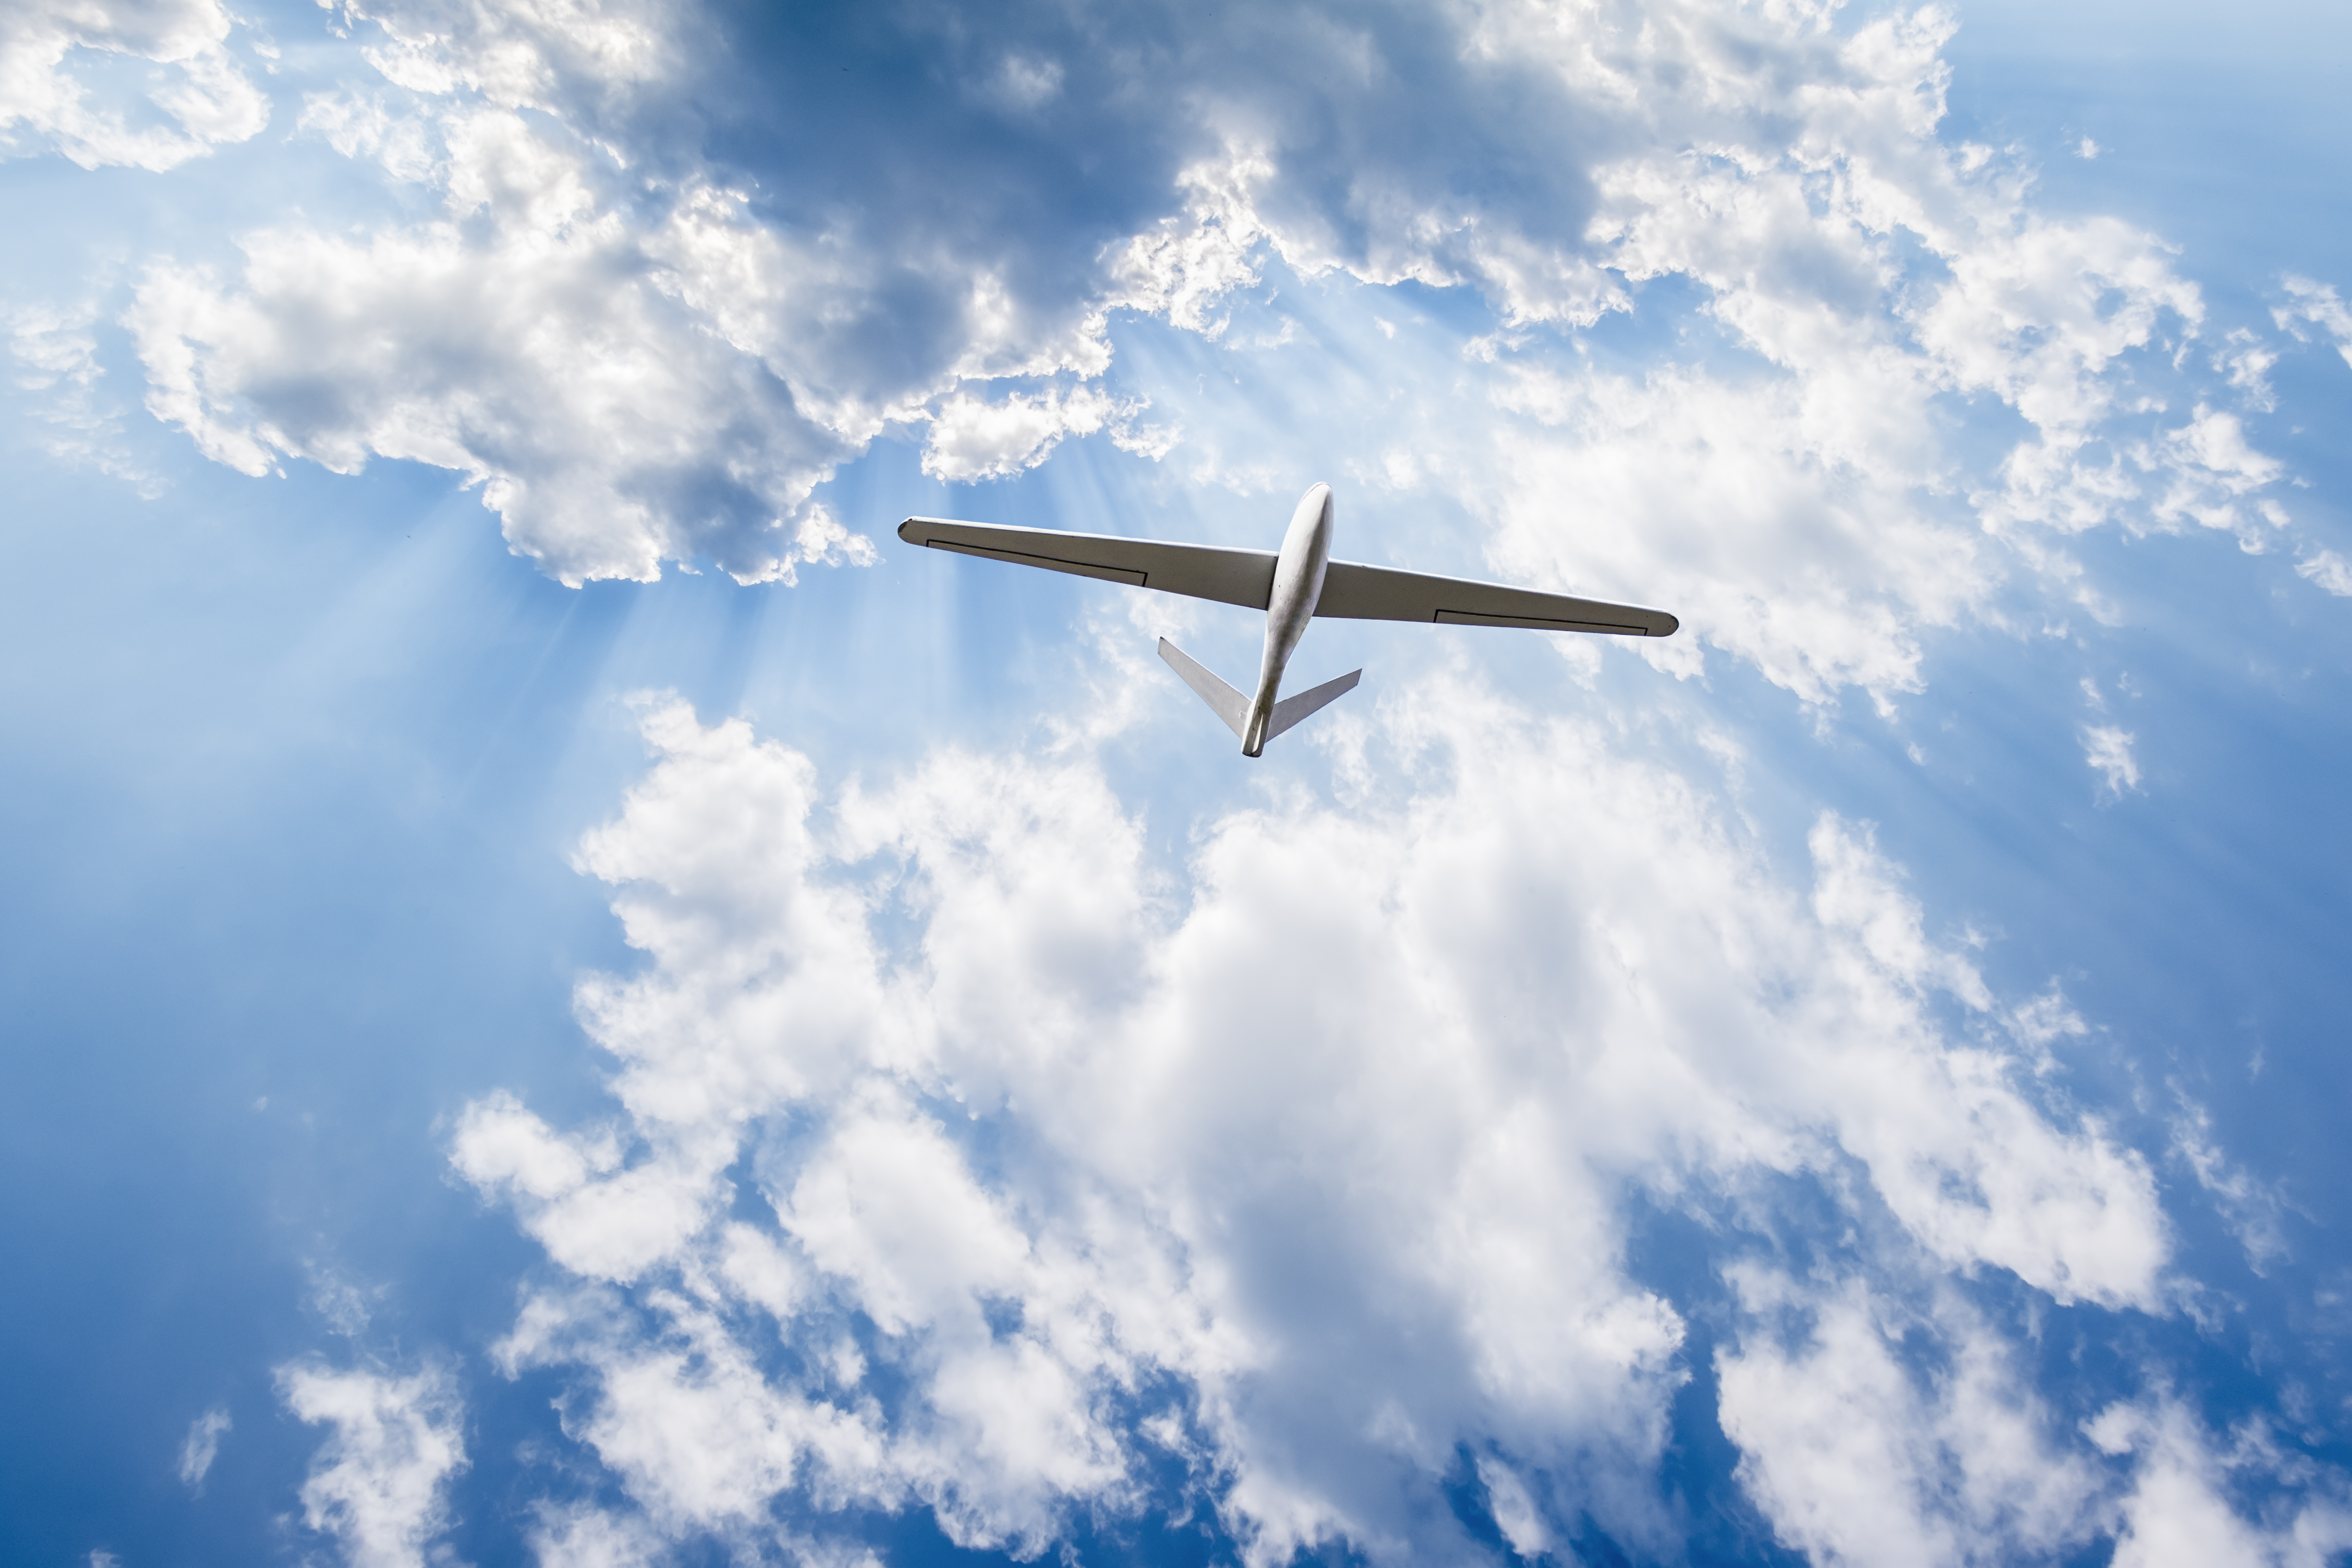 Unmanned aerial vehicle in cloudy sky Vigilant Aerospace